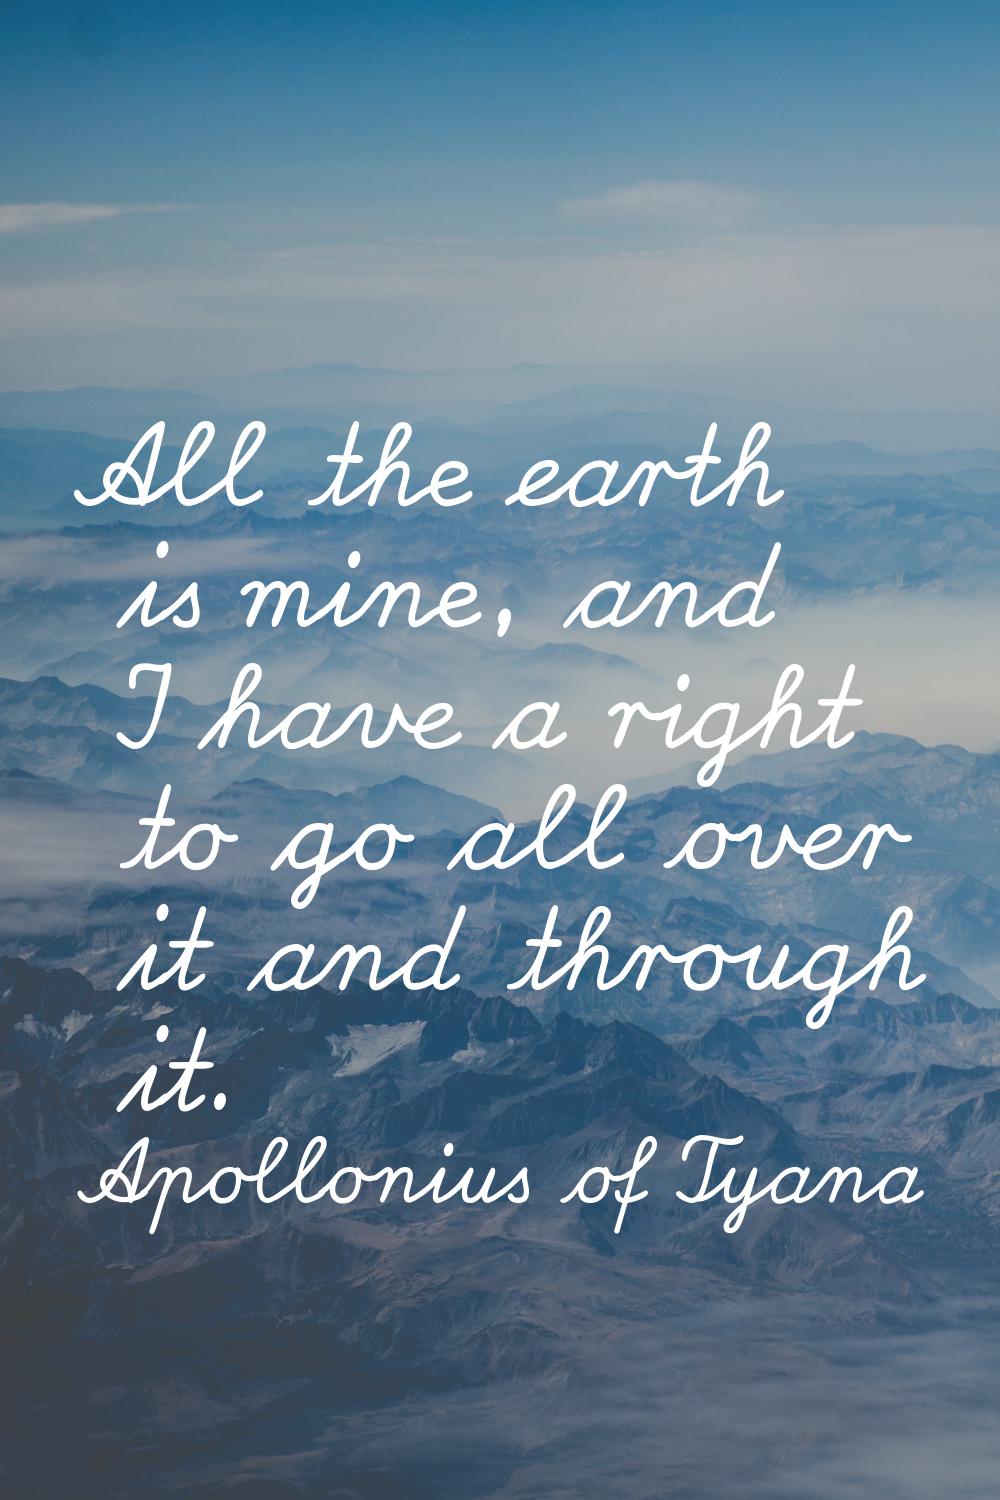 All the earth is mine, and I have a right to go all over it and through it.